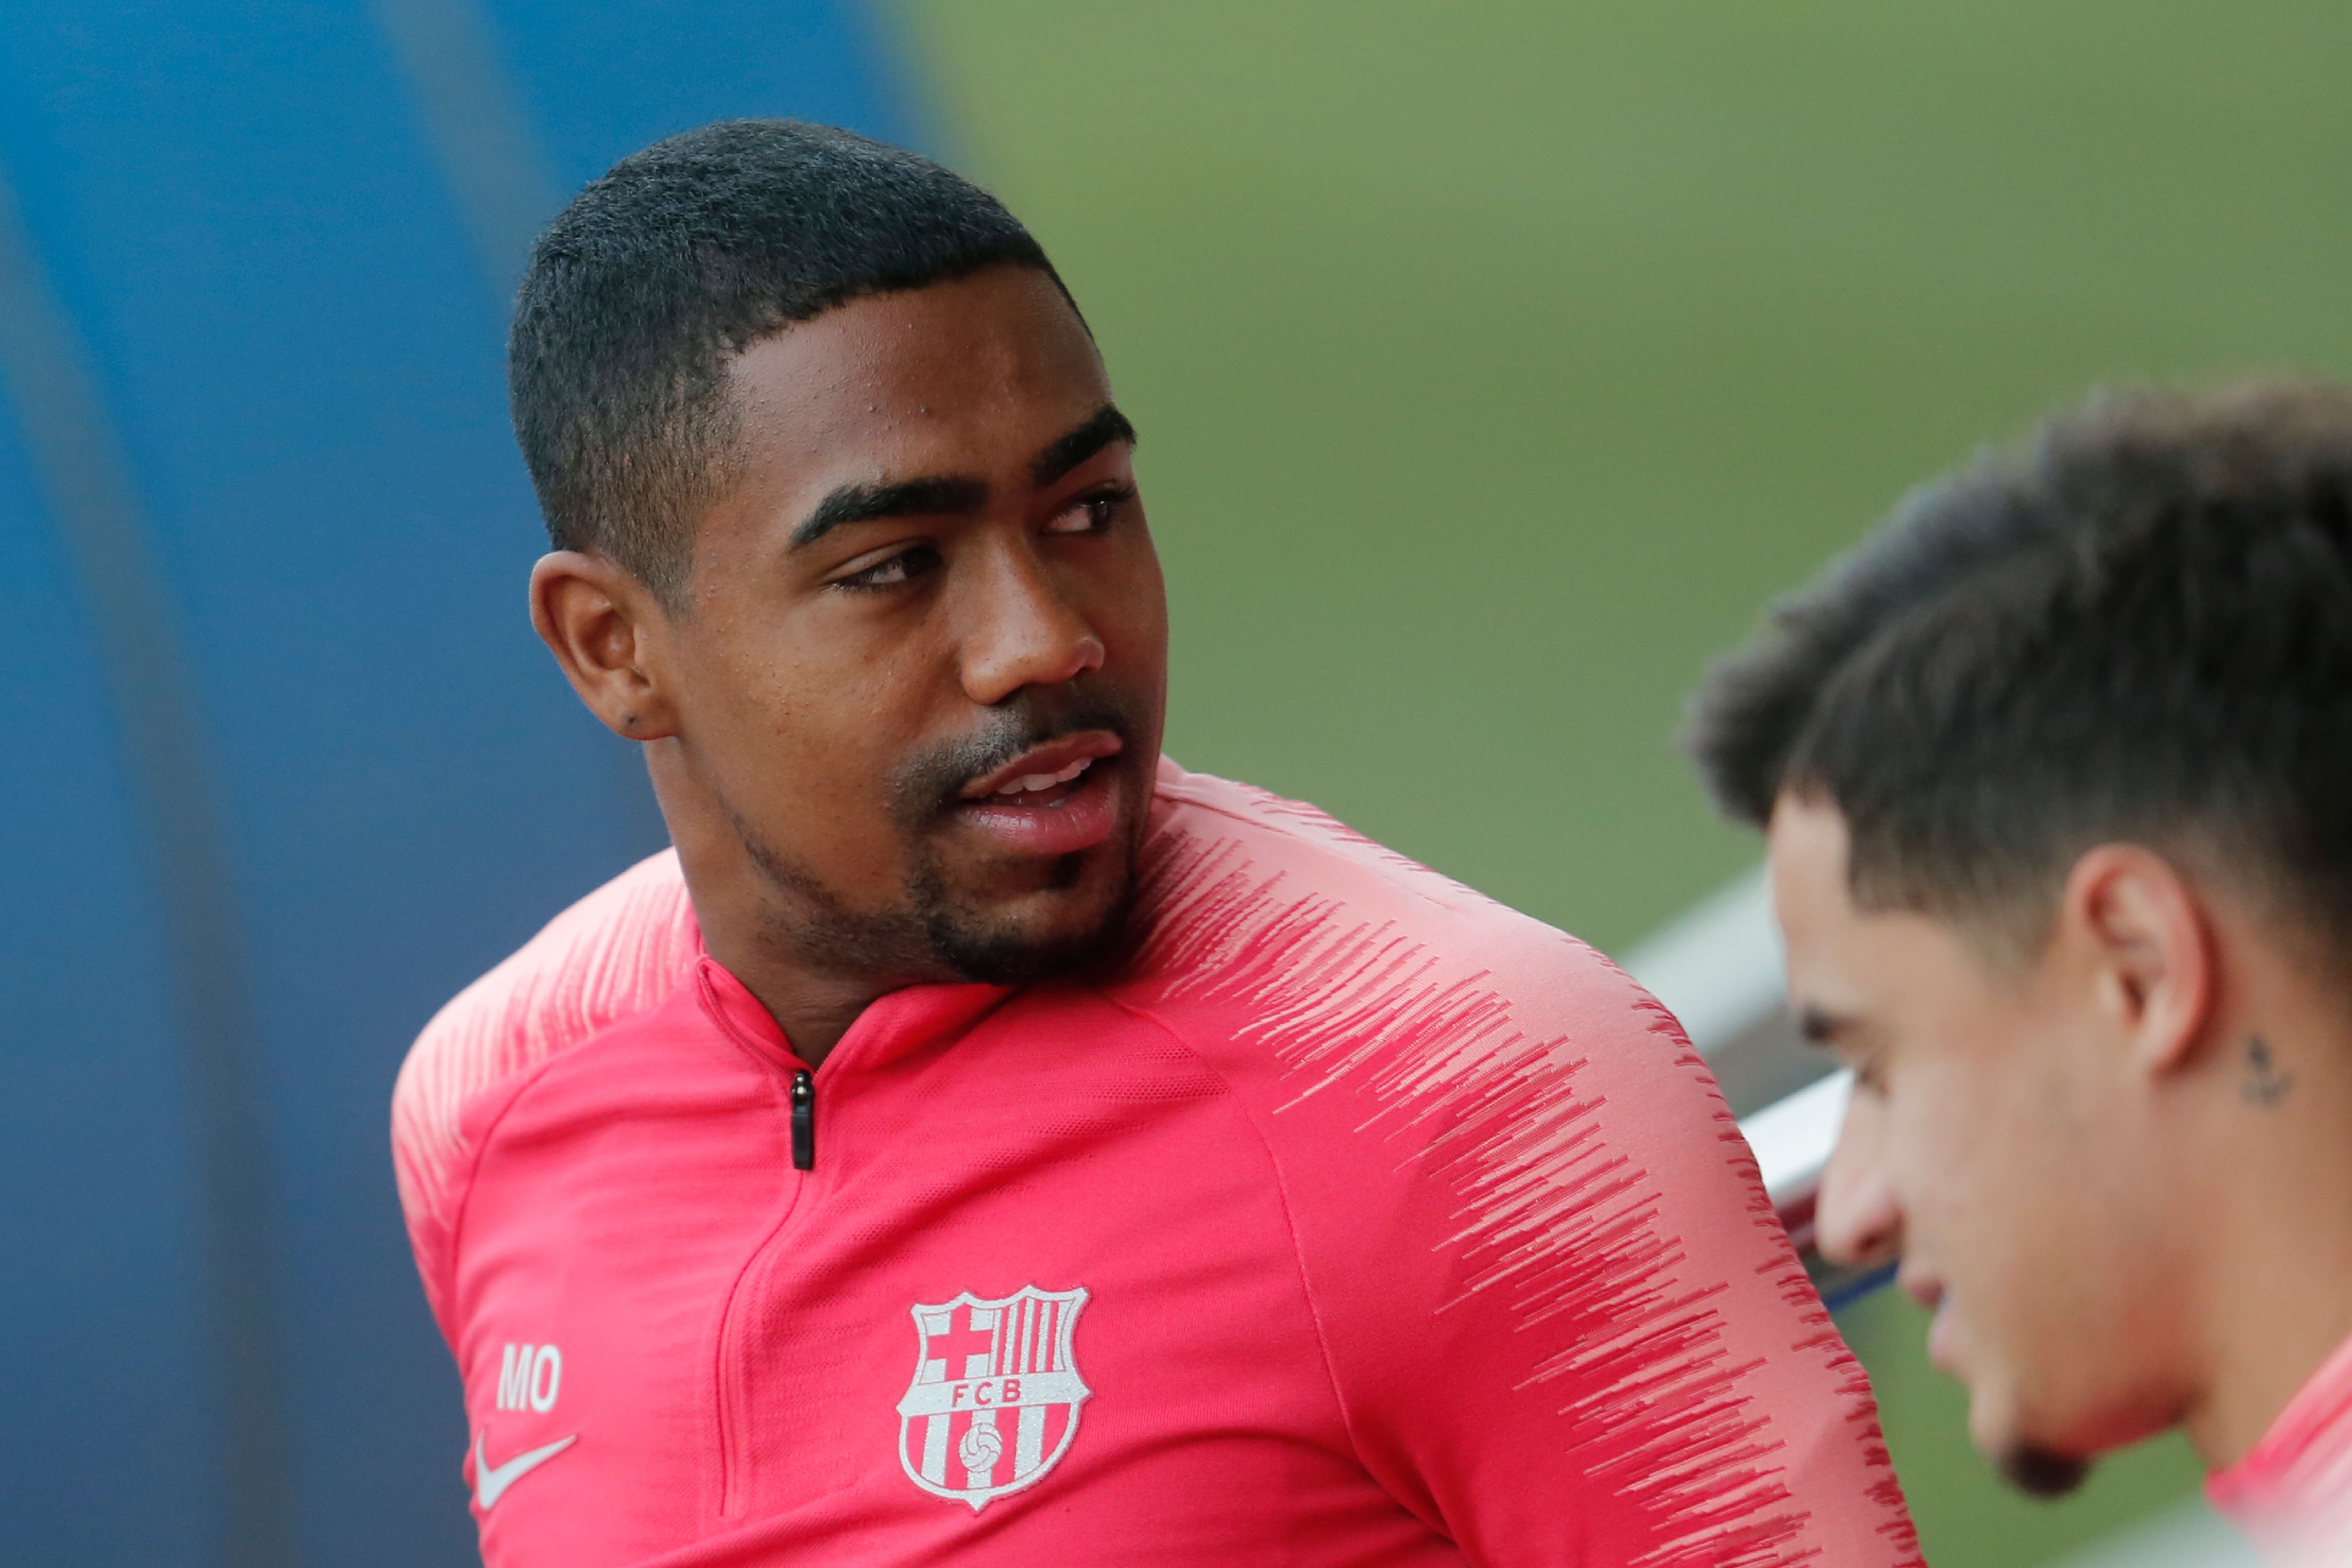 Everton and Arsenal are interested in Malcom. (Photo by Pau Barrena/AFP/Getty Images)